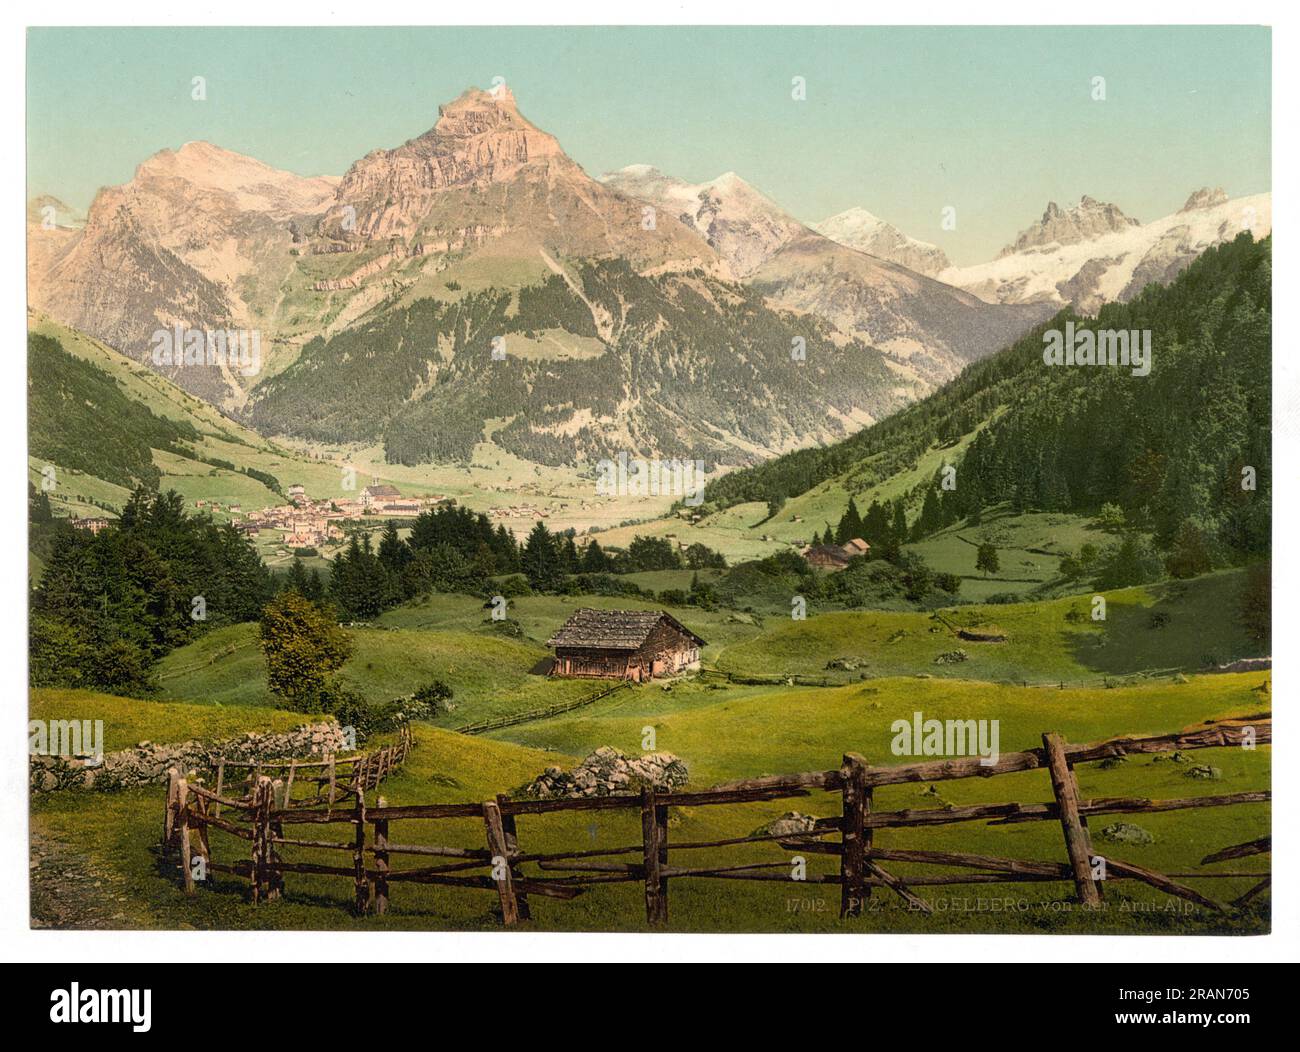 Historic switzerland Cut Out Stock Images & Pictures - Page 2 - Alamy